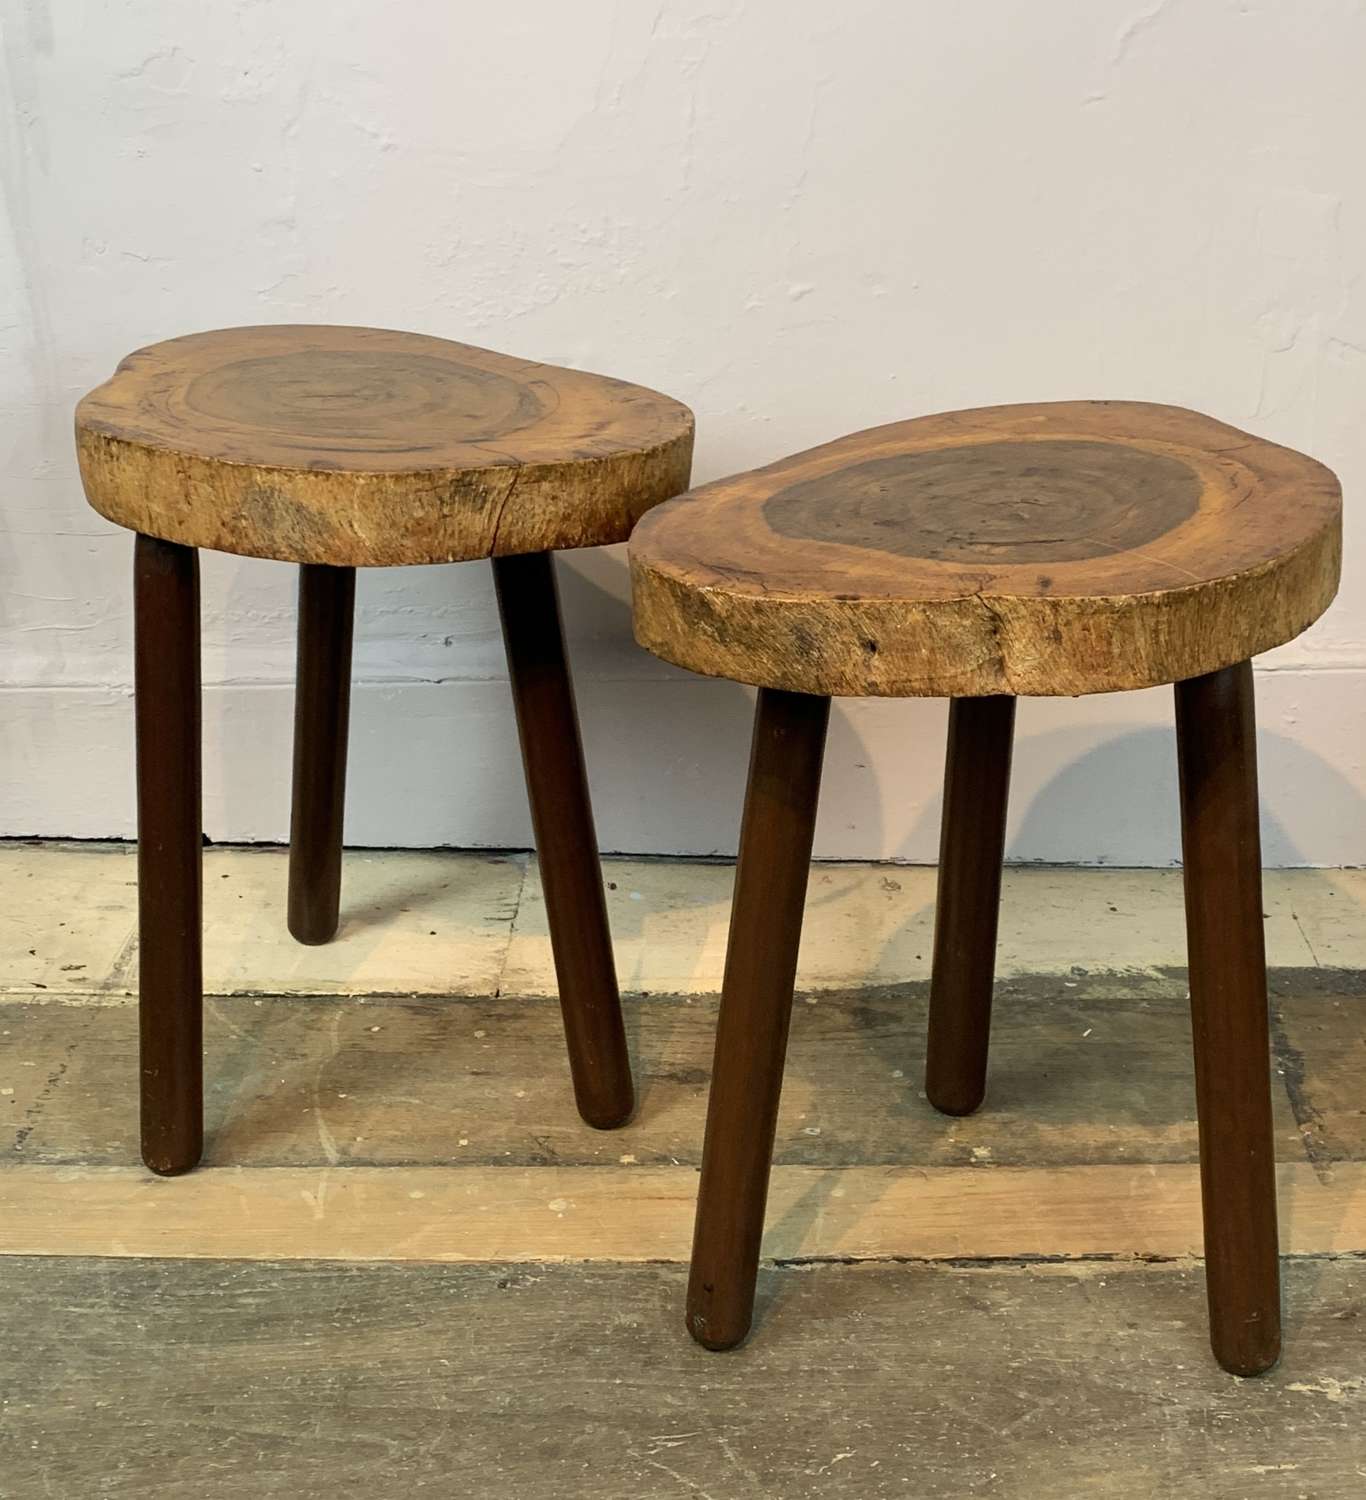 A Pair of Rustic Tree Trunk Slab Tables or Stools